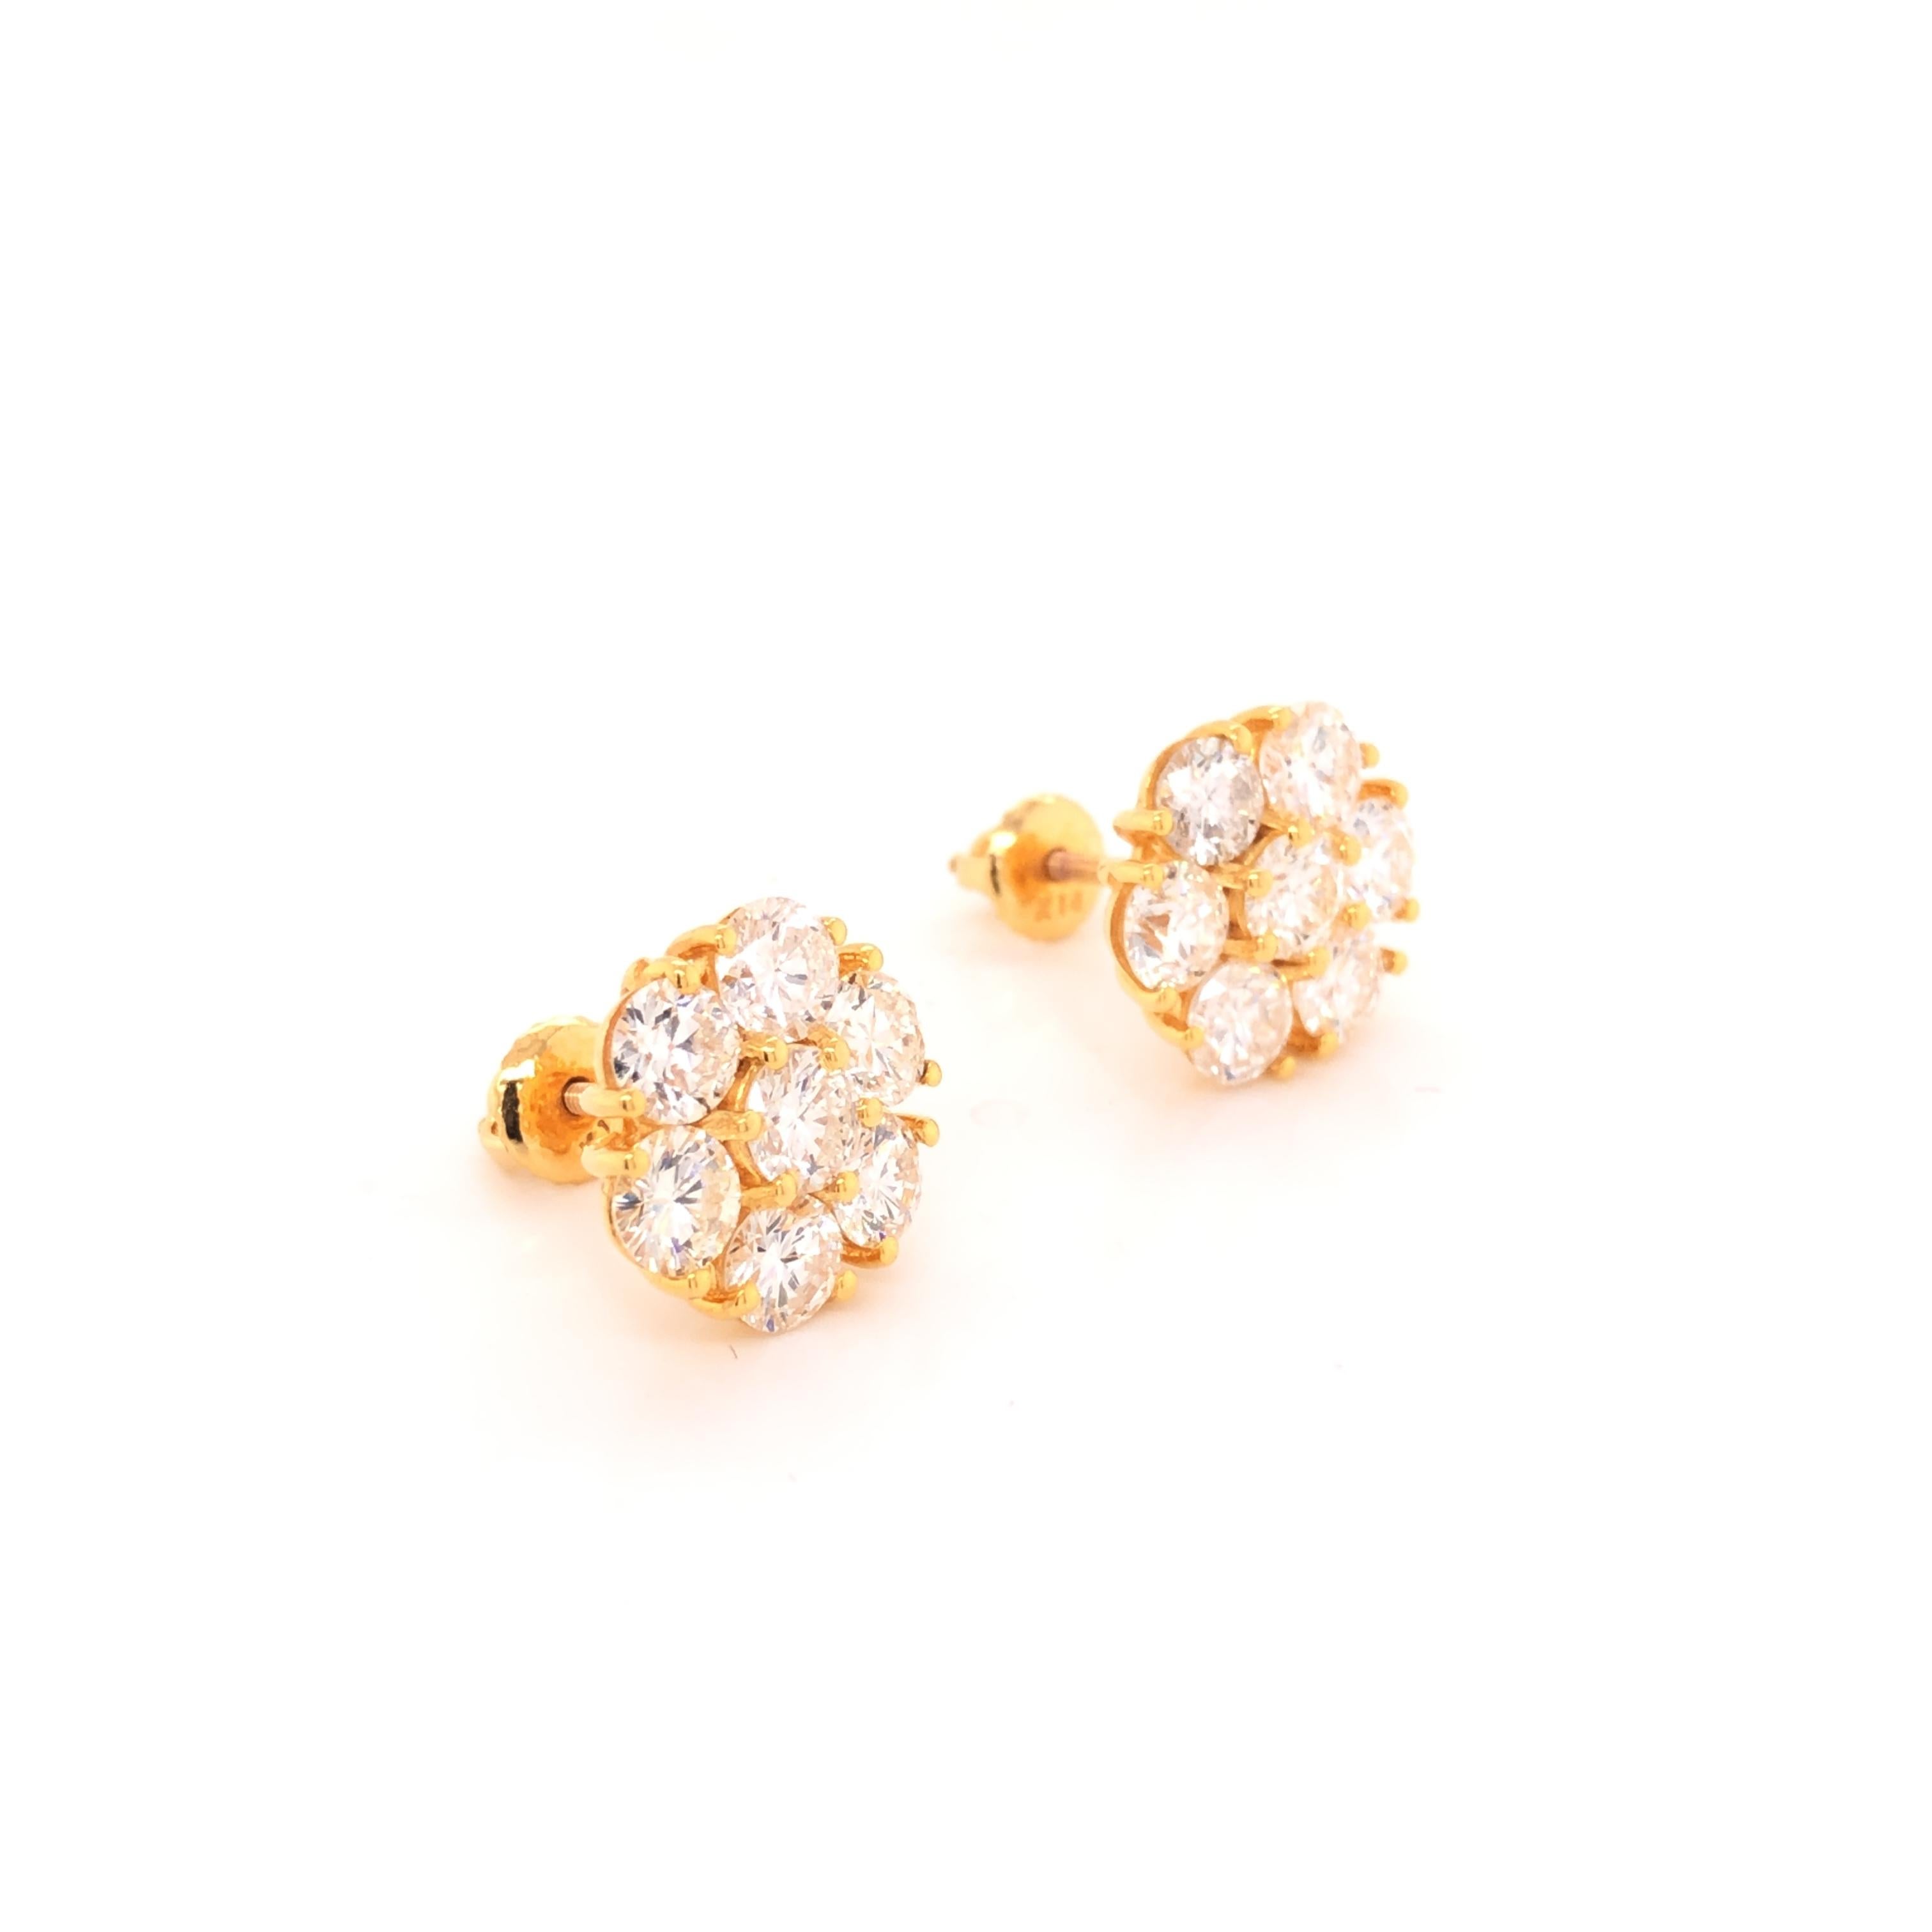 A simple and elegant pair of cluster diamond floral earring studs contain 14 round-cut 30 pointer diamonds, set in 14K yellow gold.

Diamond weight 4.20 carats